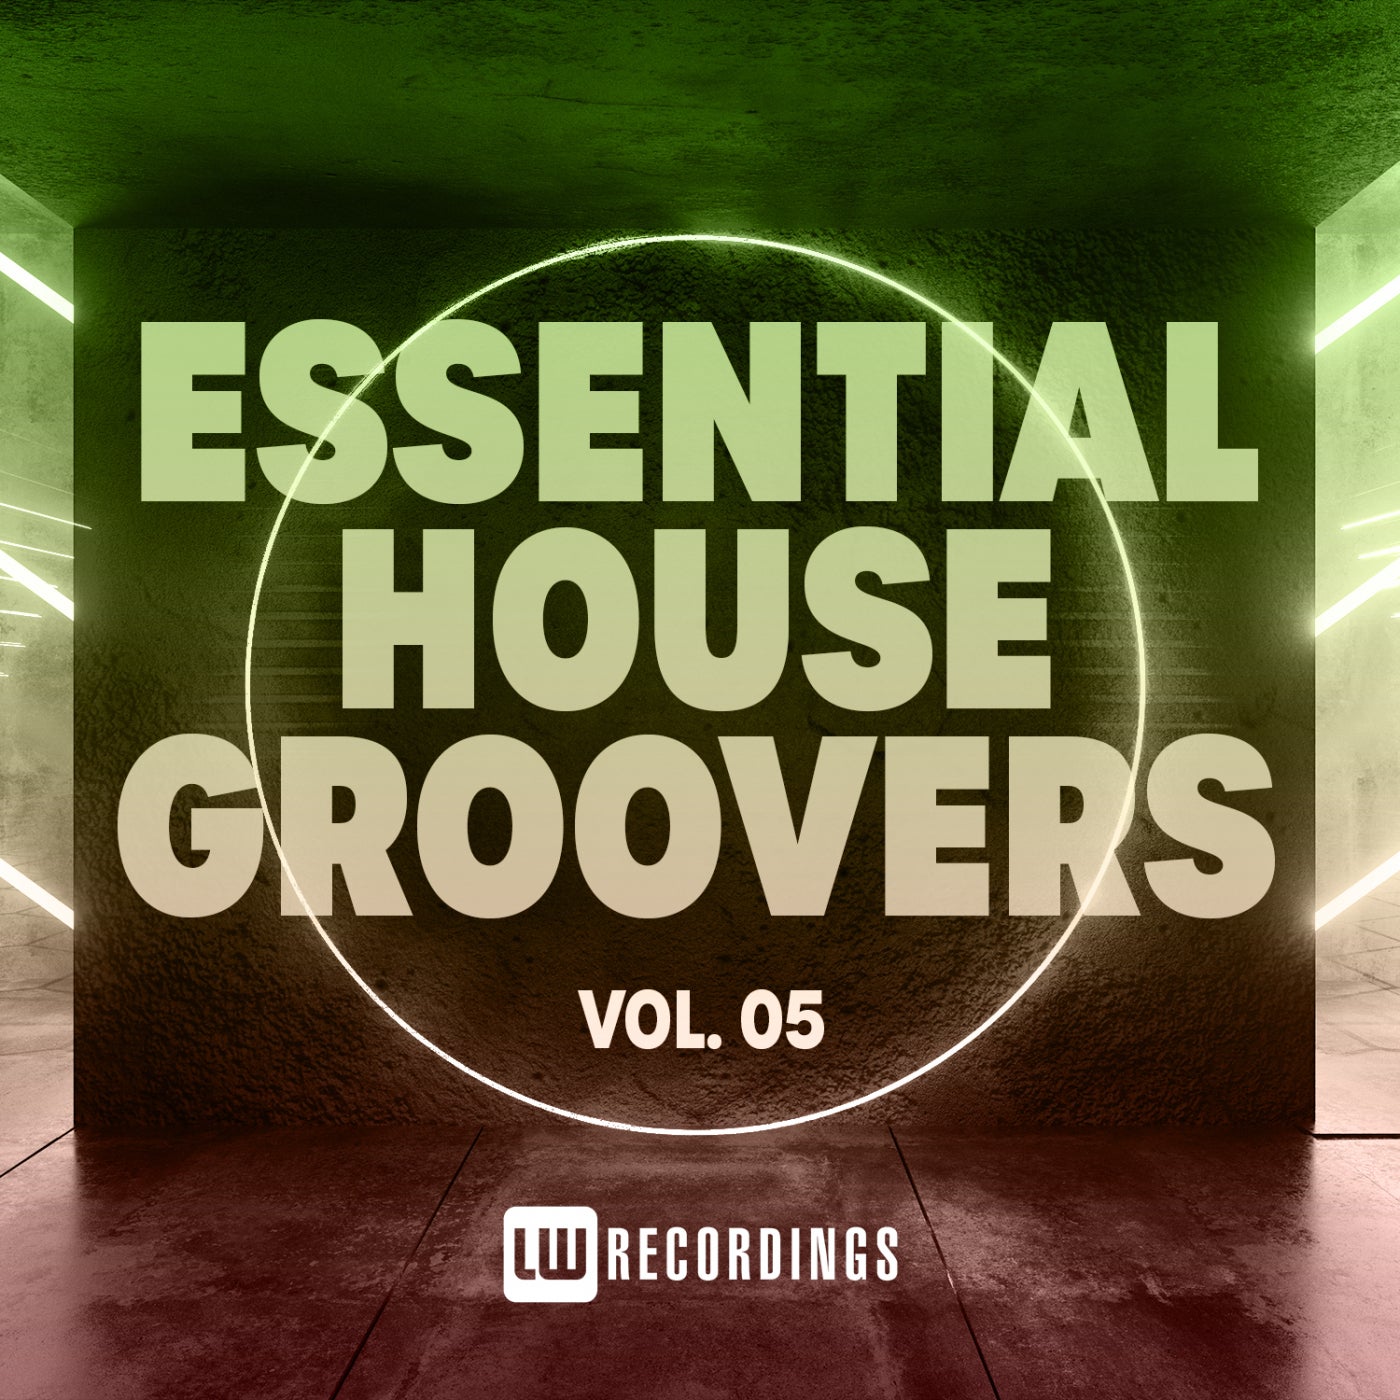 Essential House Groovers, Vol. 05